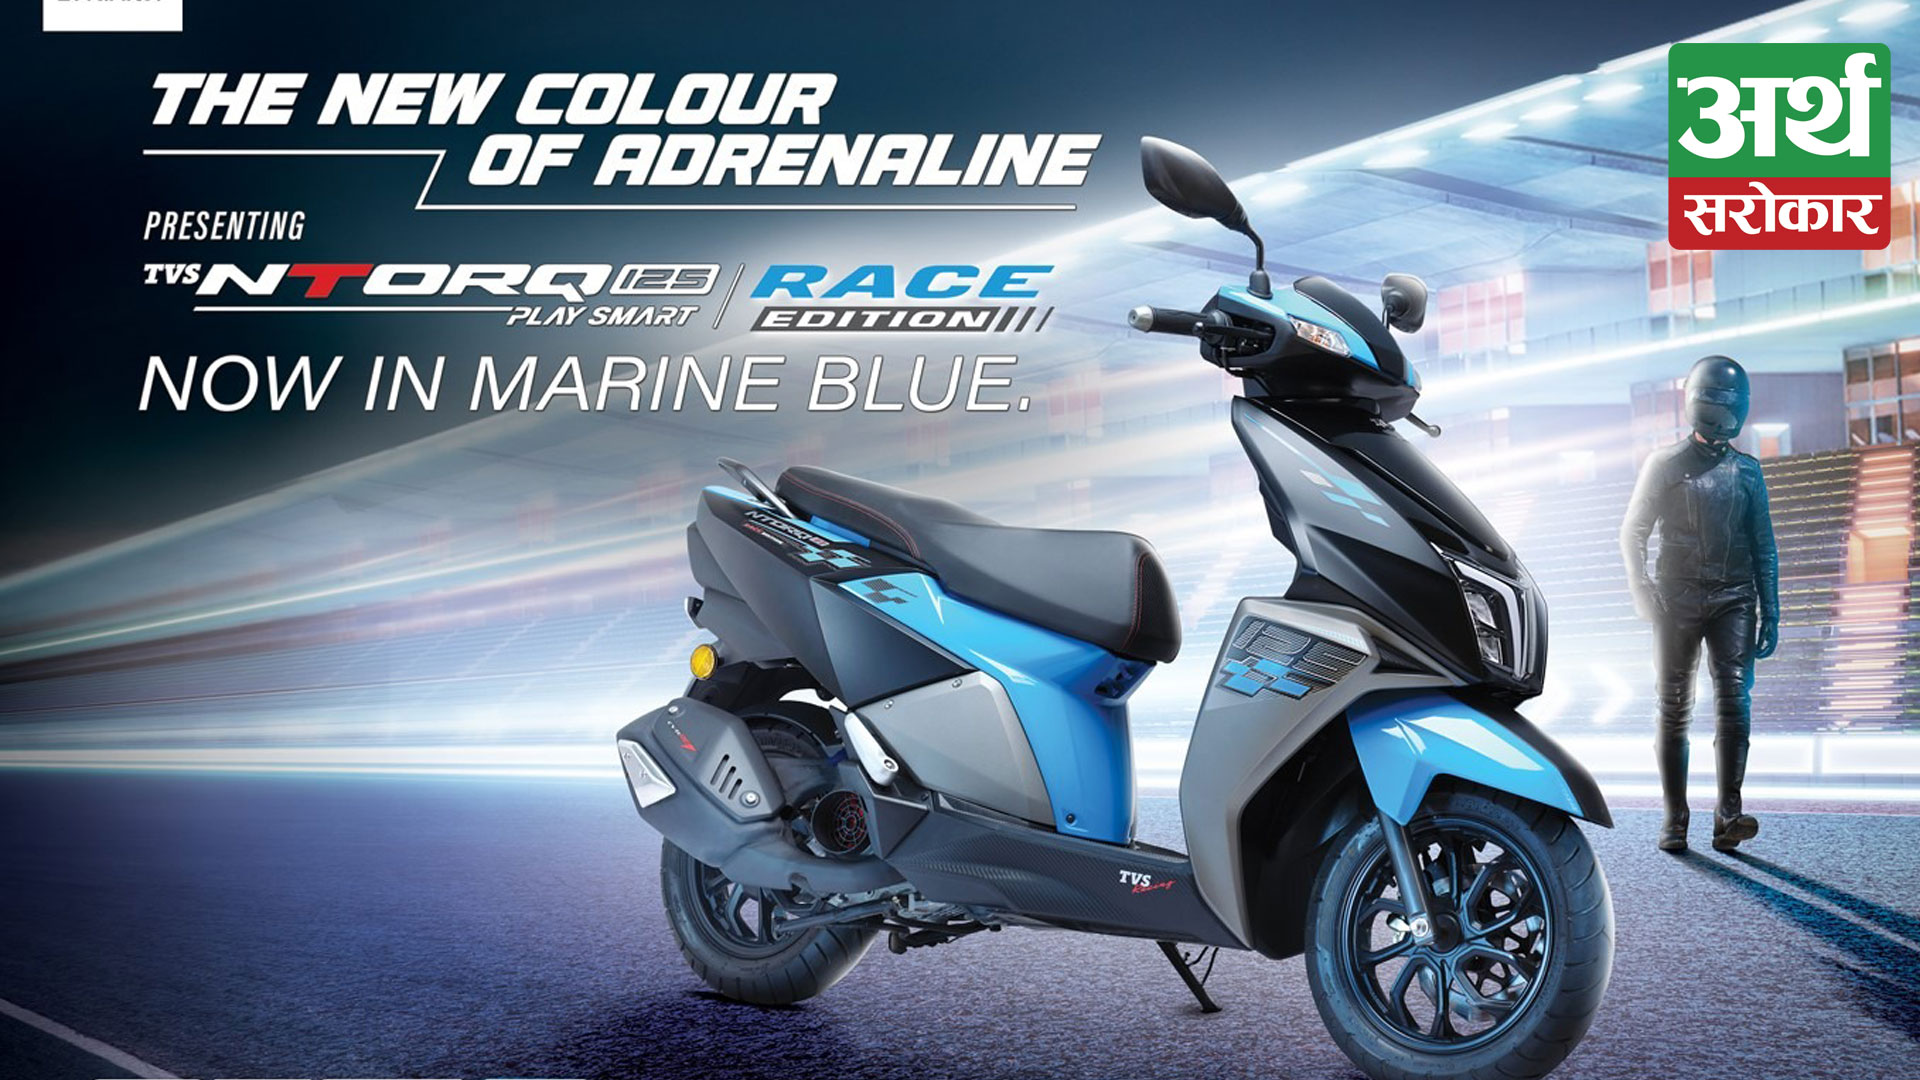 TVS Motor Company Launches New Youthful Marine Blue Color For TVS NTORQ 125 Race Edition